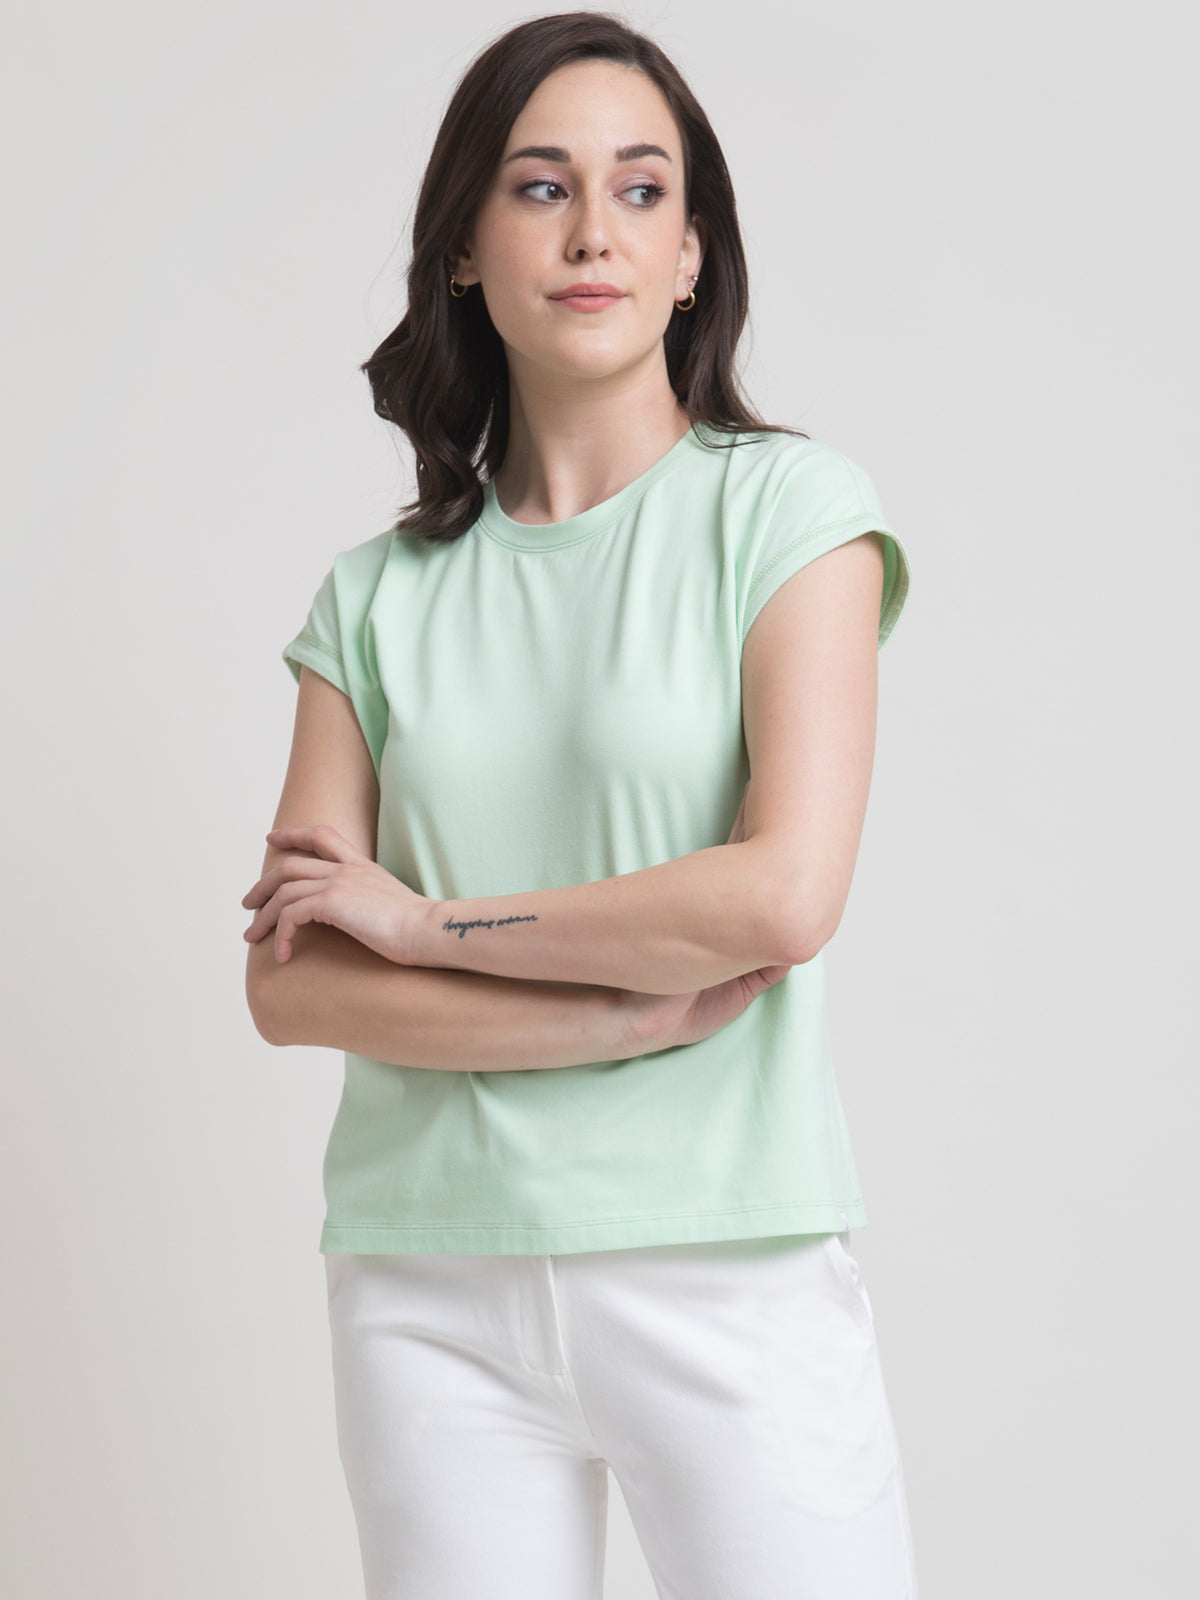 Cotton Round Neck Knitted T Shirt - Mint Green